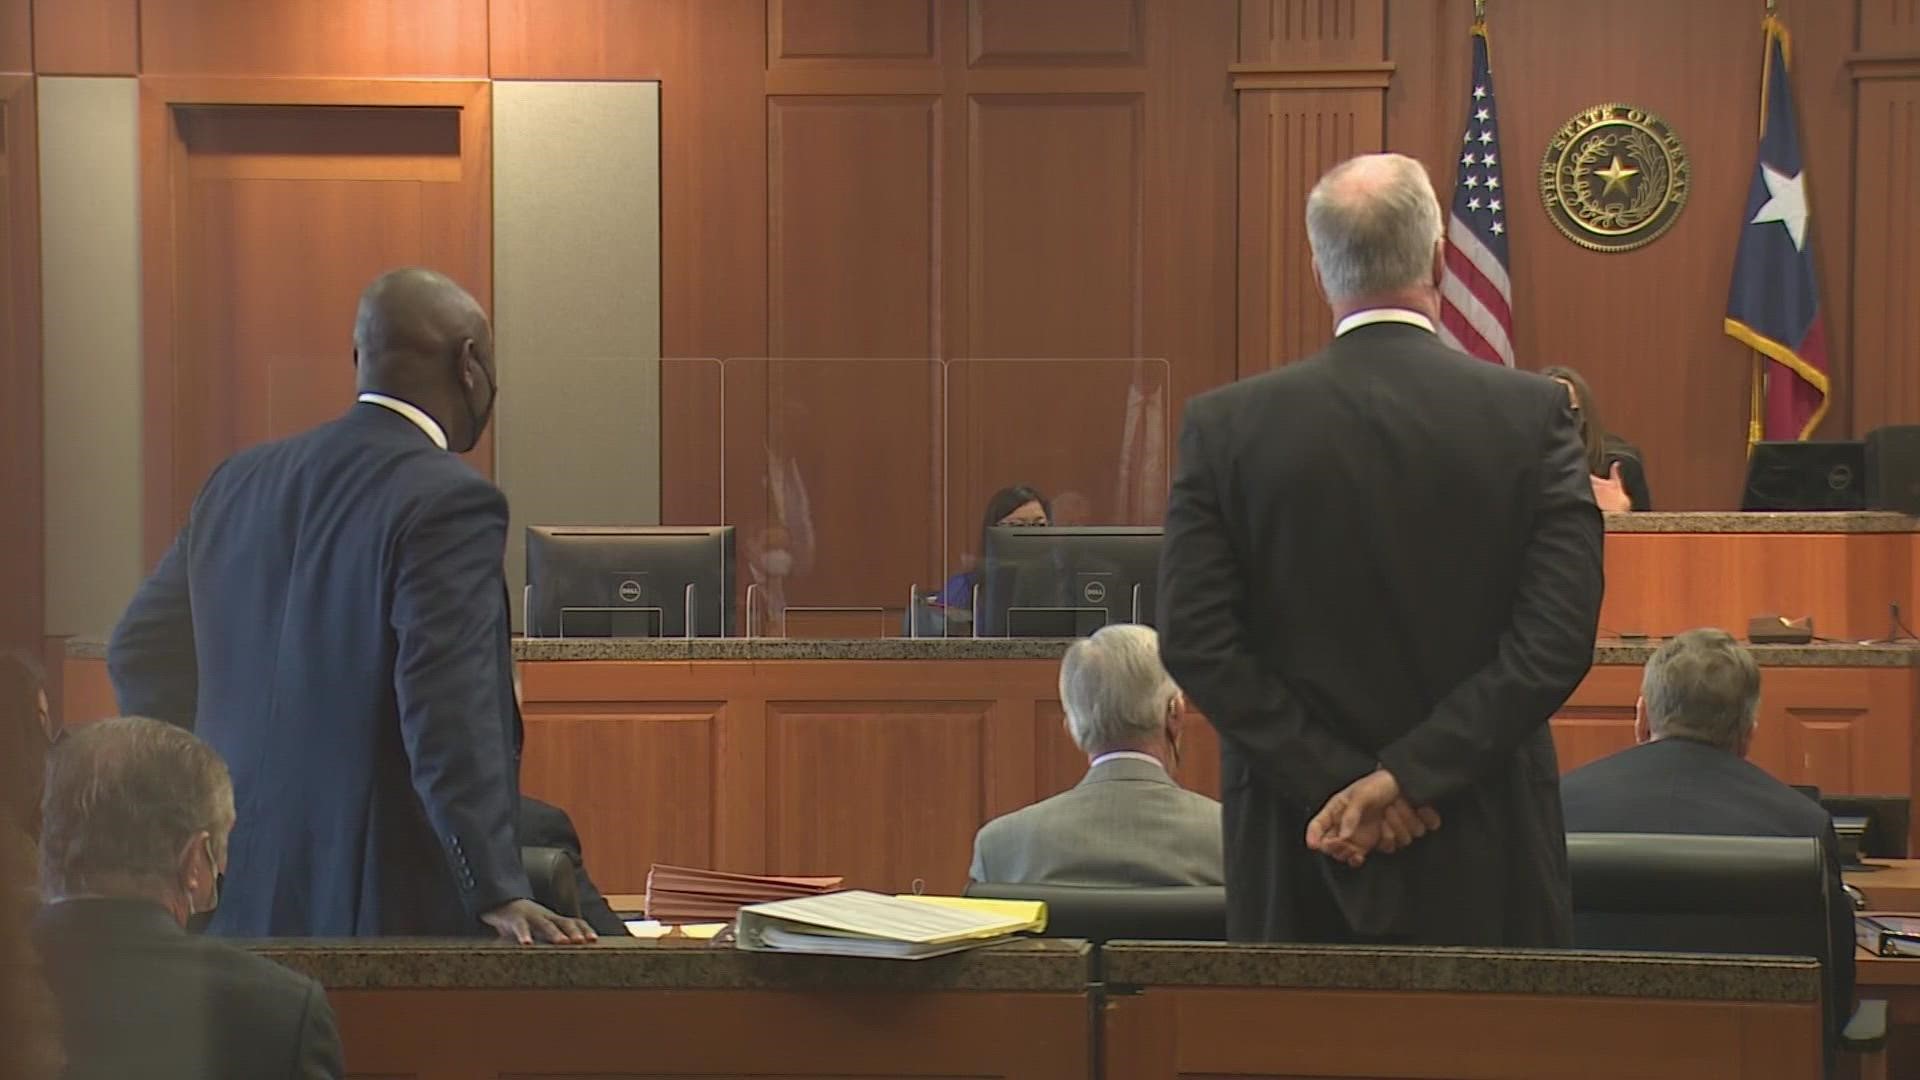 High-profile attorneys, including Ben Crump, were in court to file motions regarding the lawsuits, which are being consolidated.